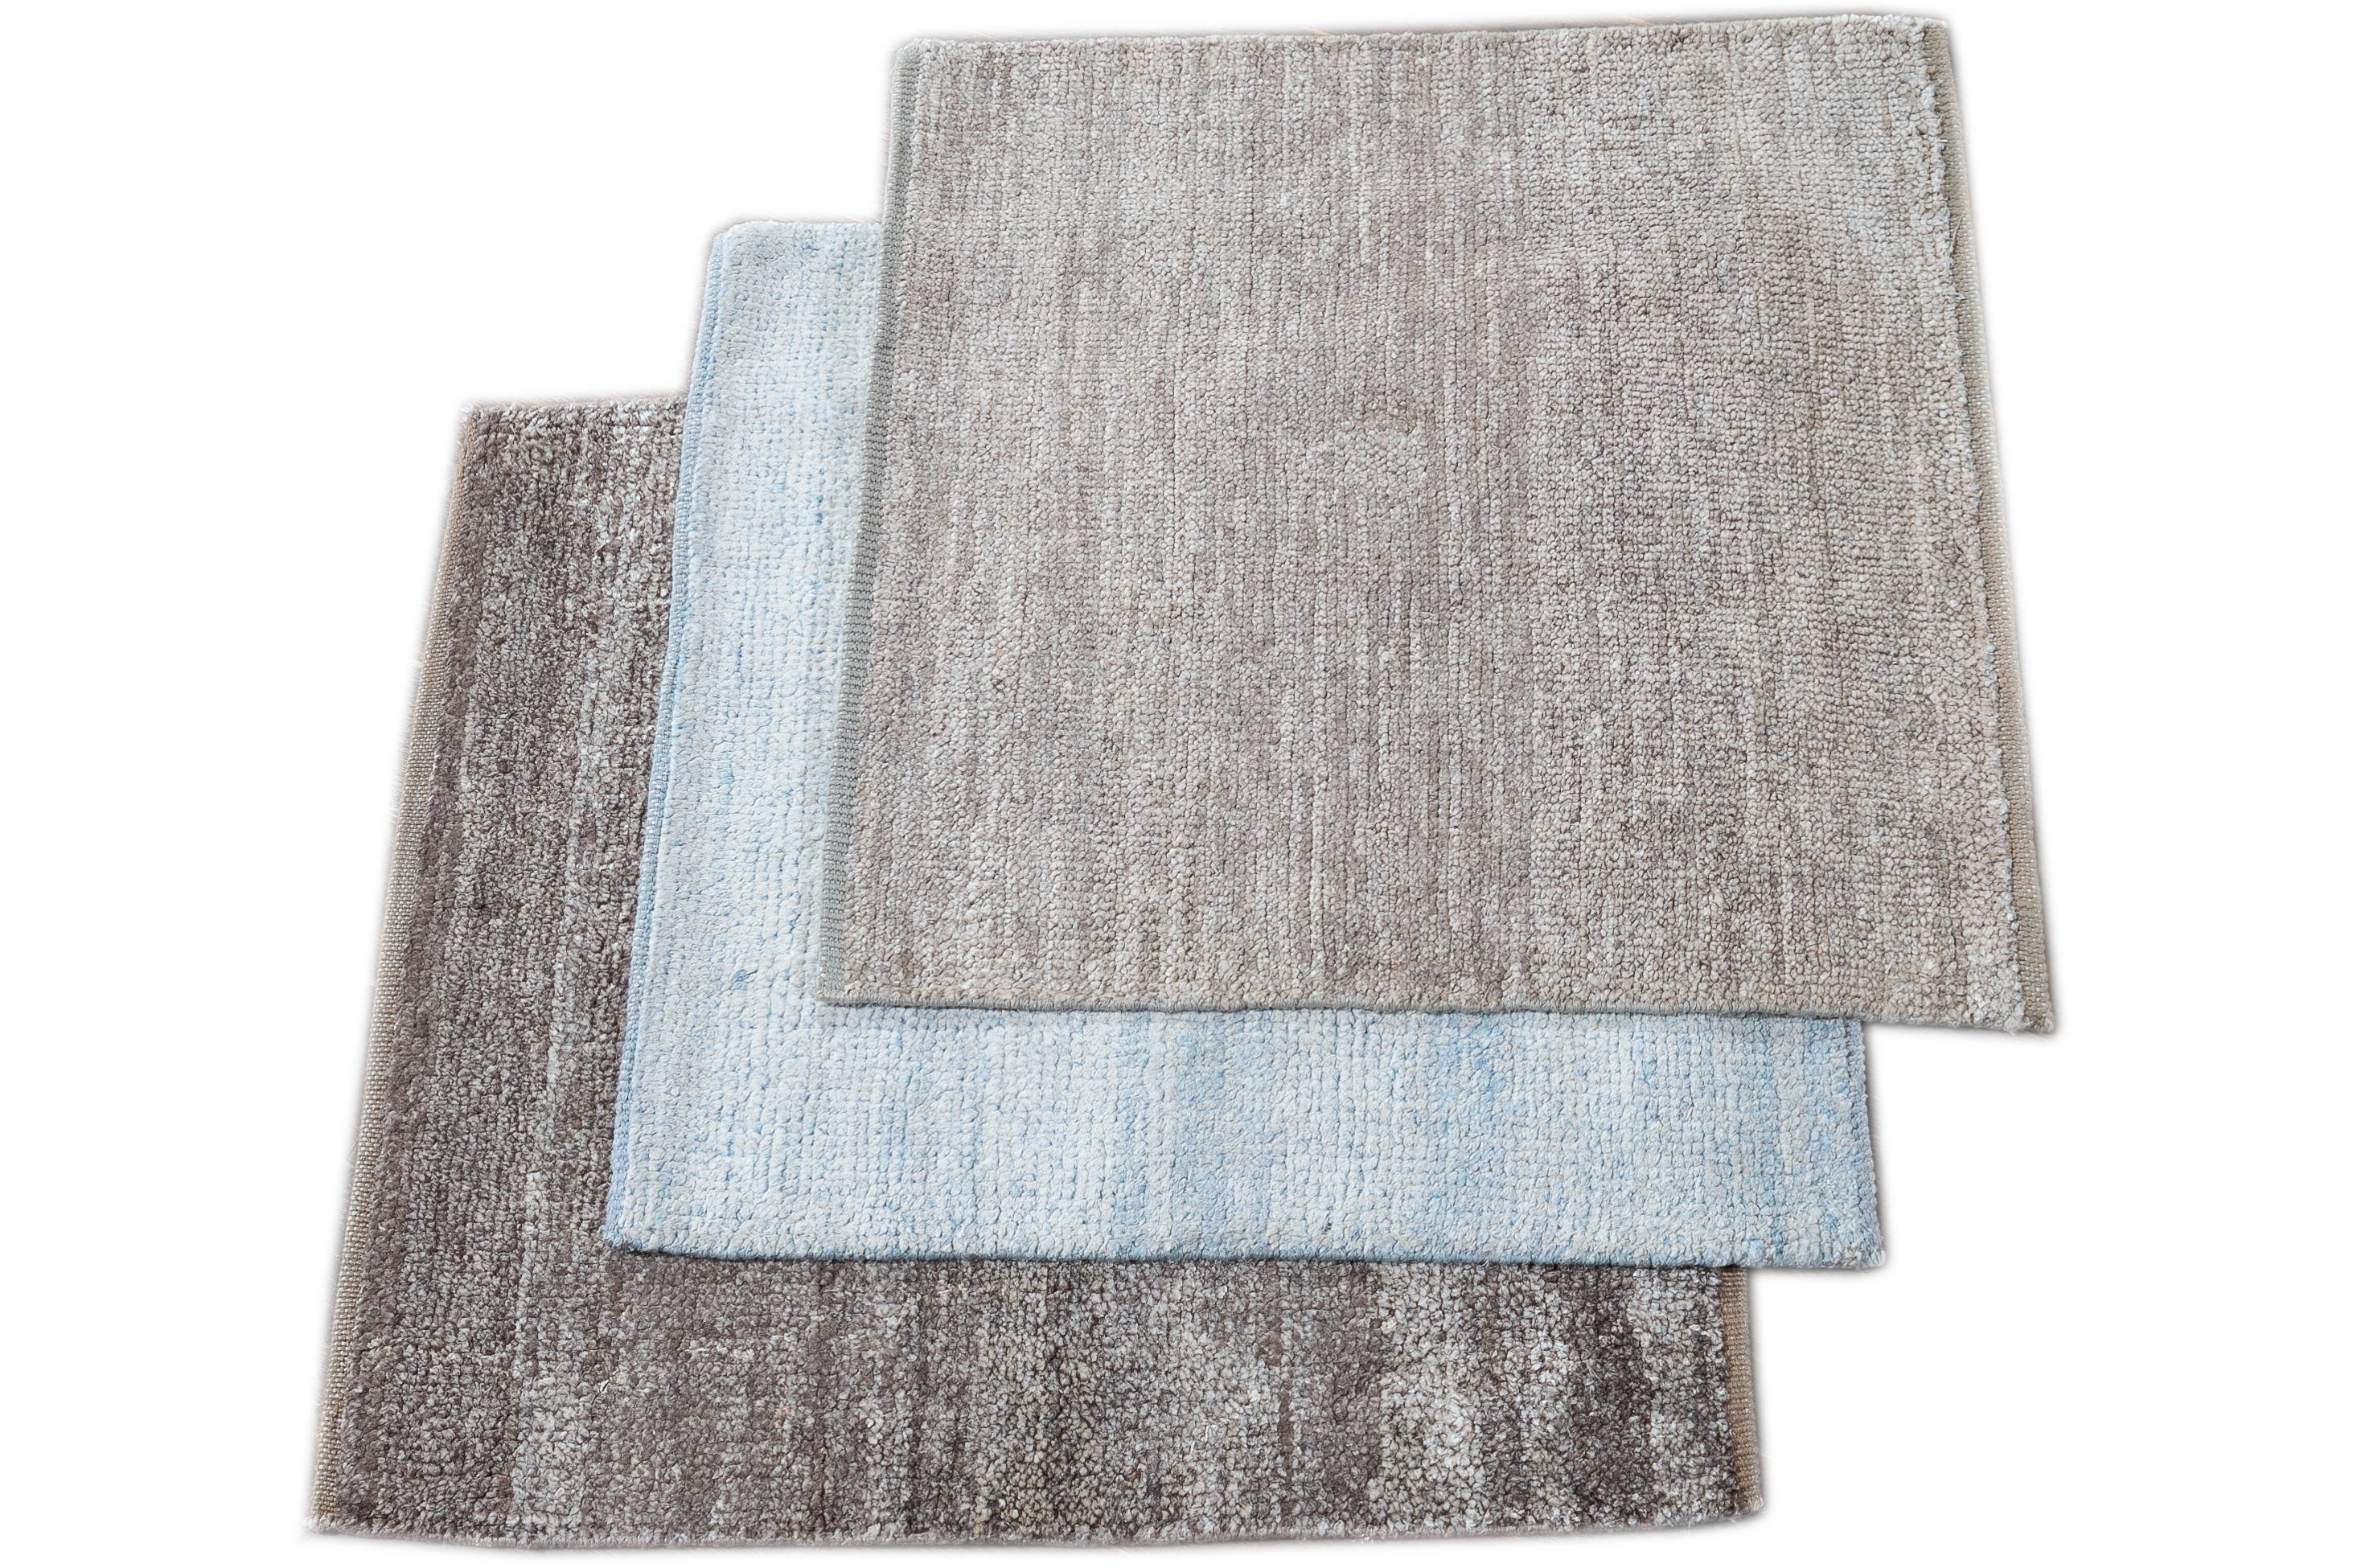 Groove custom silk rug. Custom sizes and colors made-to-order.
Material: 100% Silk
Lead time: Approx. 12 weeks available
Colors: Grey, light blue, beige
Made in India
Price shown is for an 8' x 10' rug.